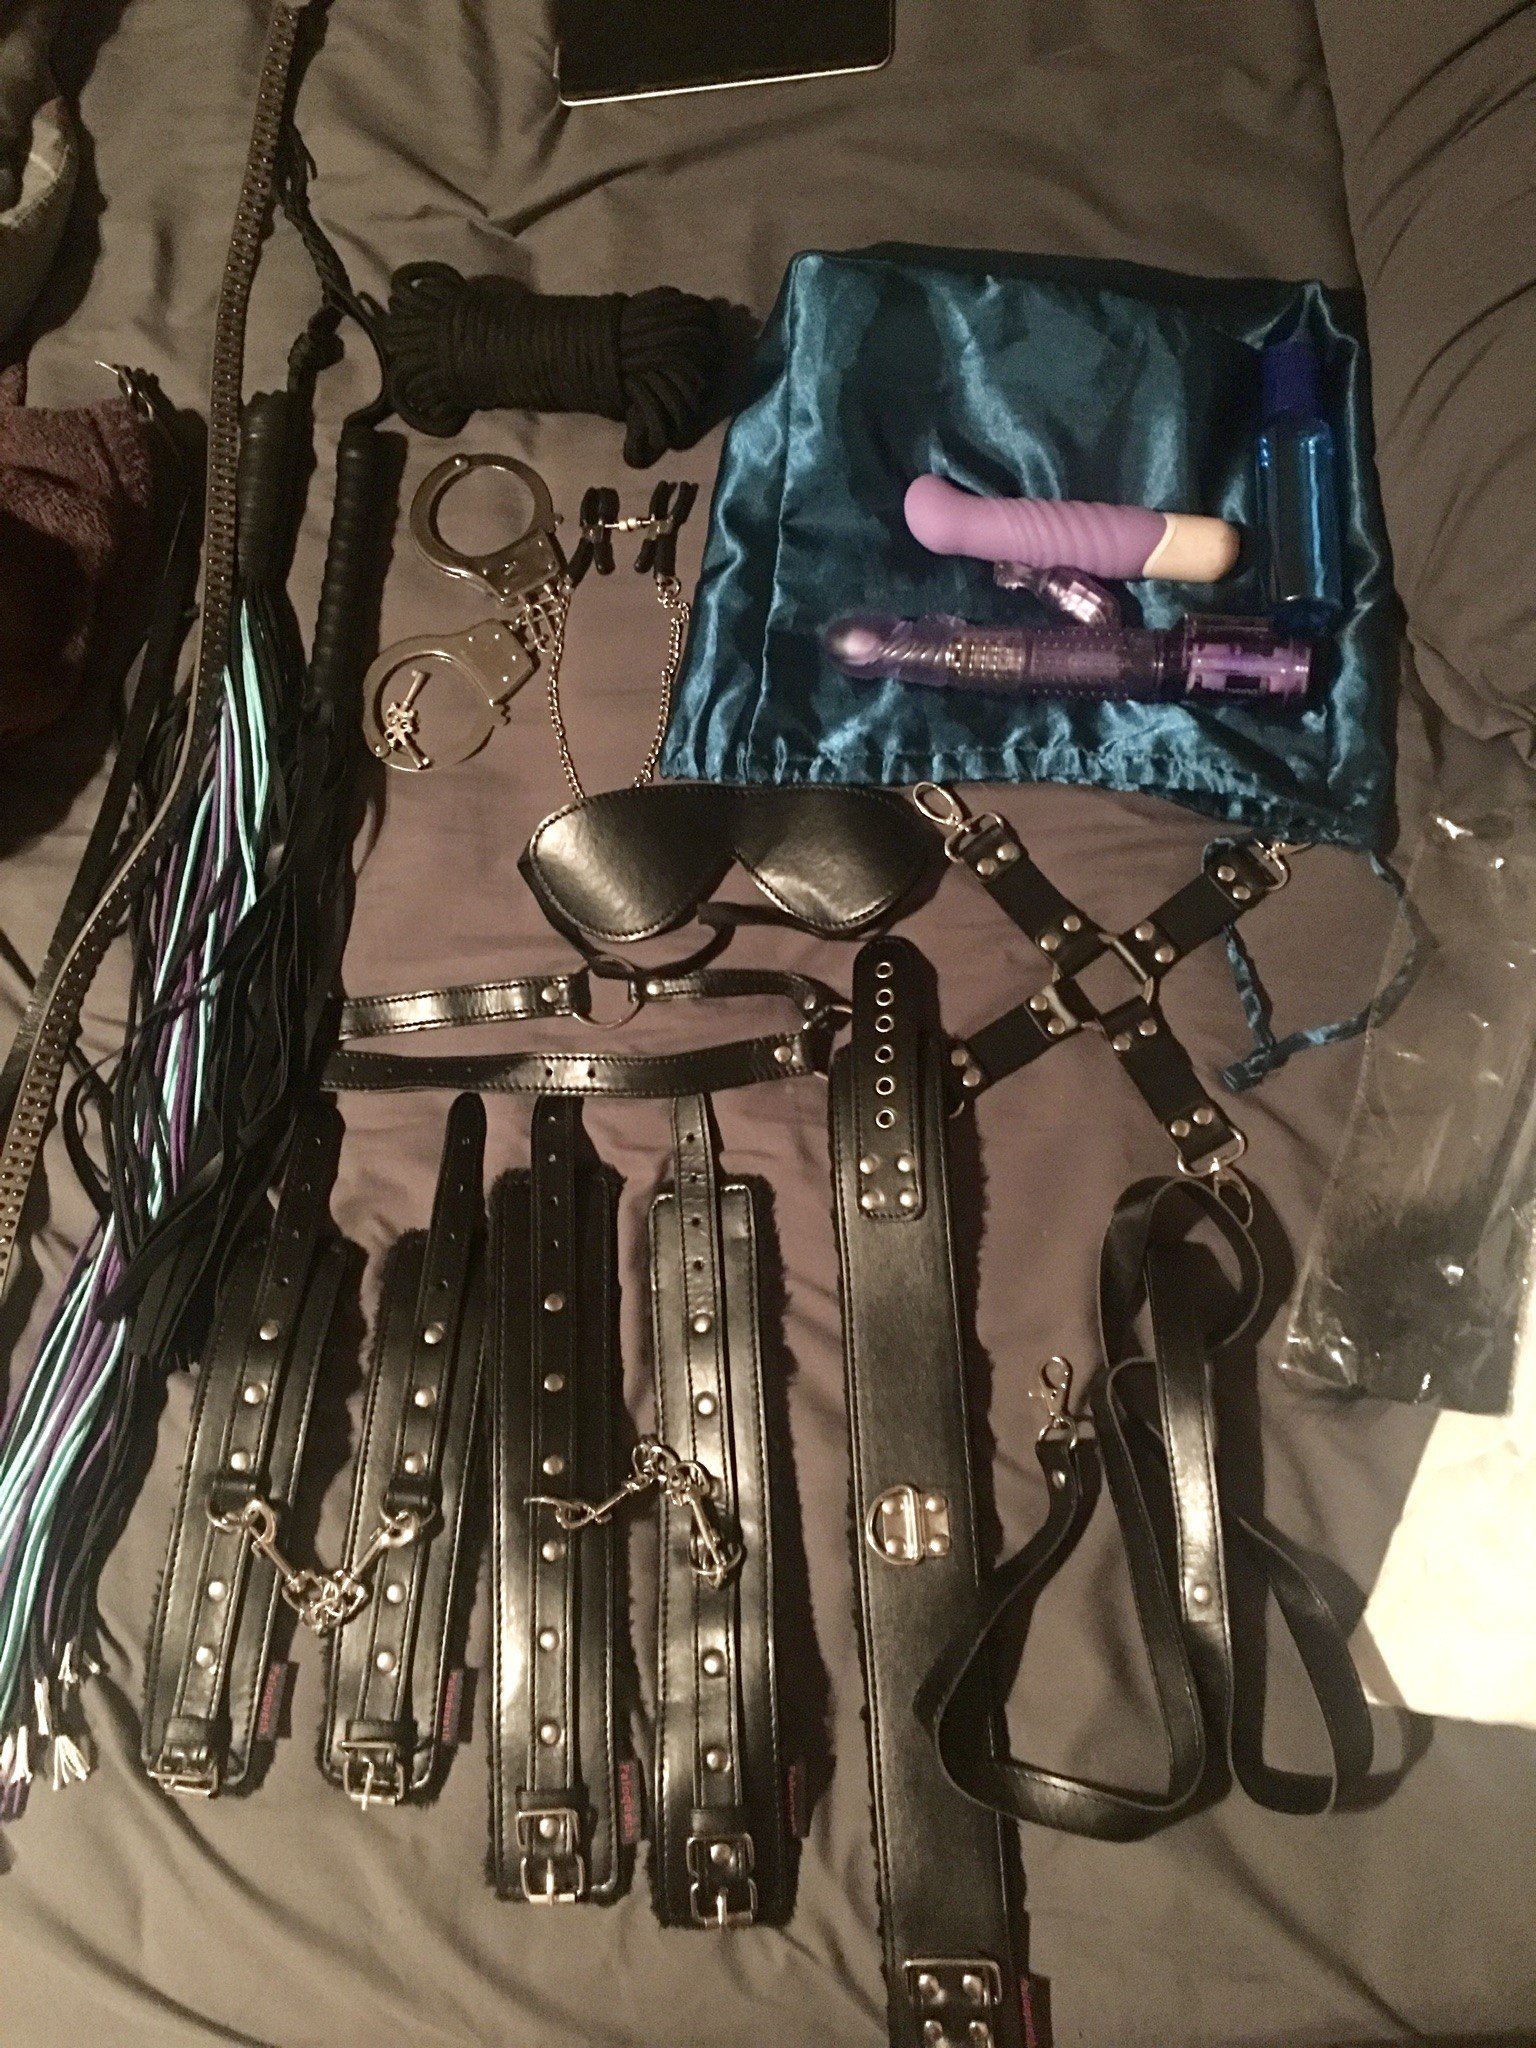 Photo by WolfAmongRavens with the username @WolfAmongRavens,  October 5, 2019 at 9:59 PM. The post is about the topic Midnght-kink and the text says '#bdsm #toys #kit #kink'